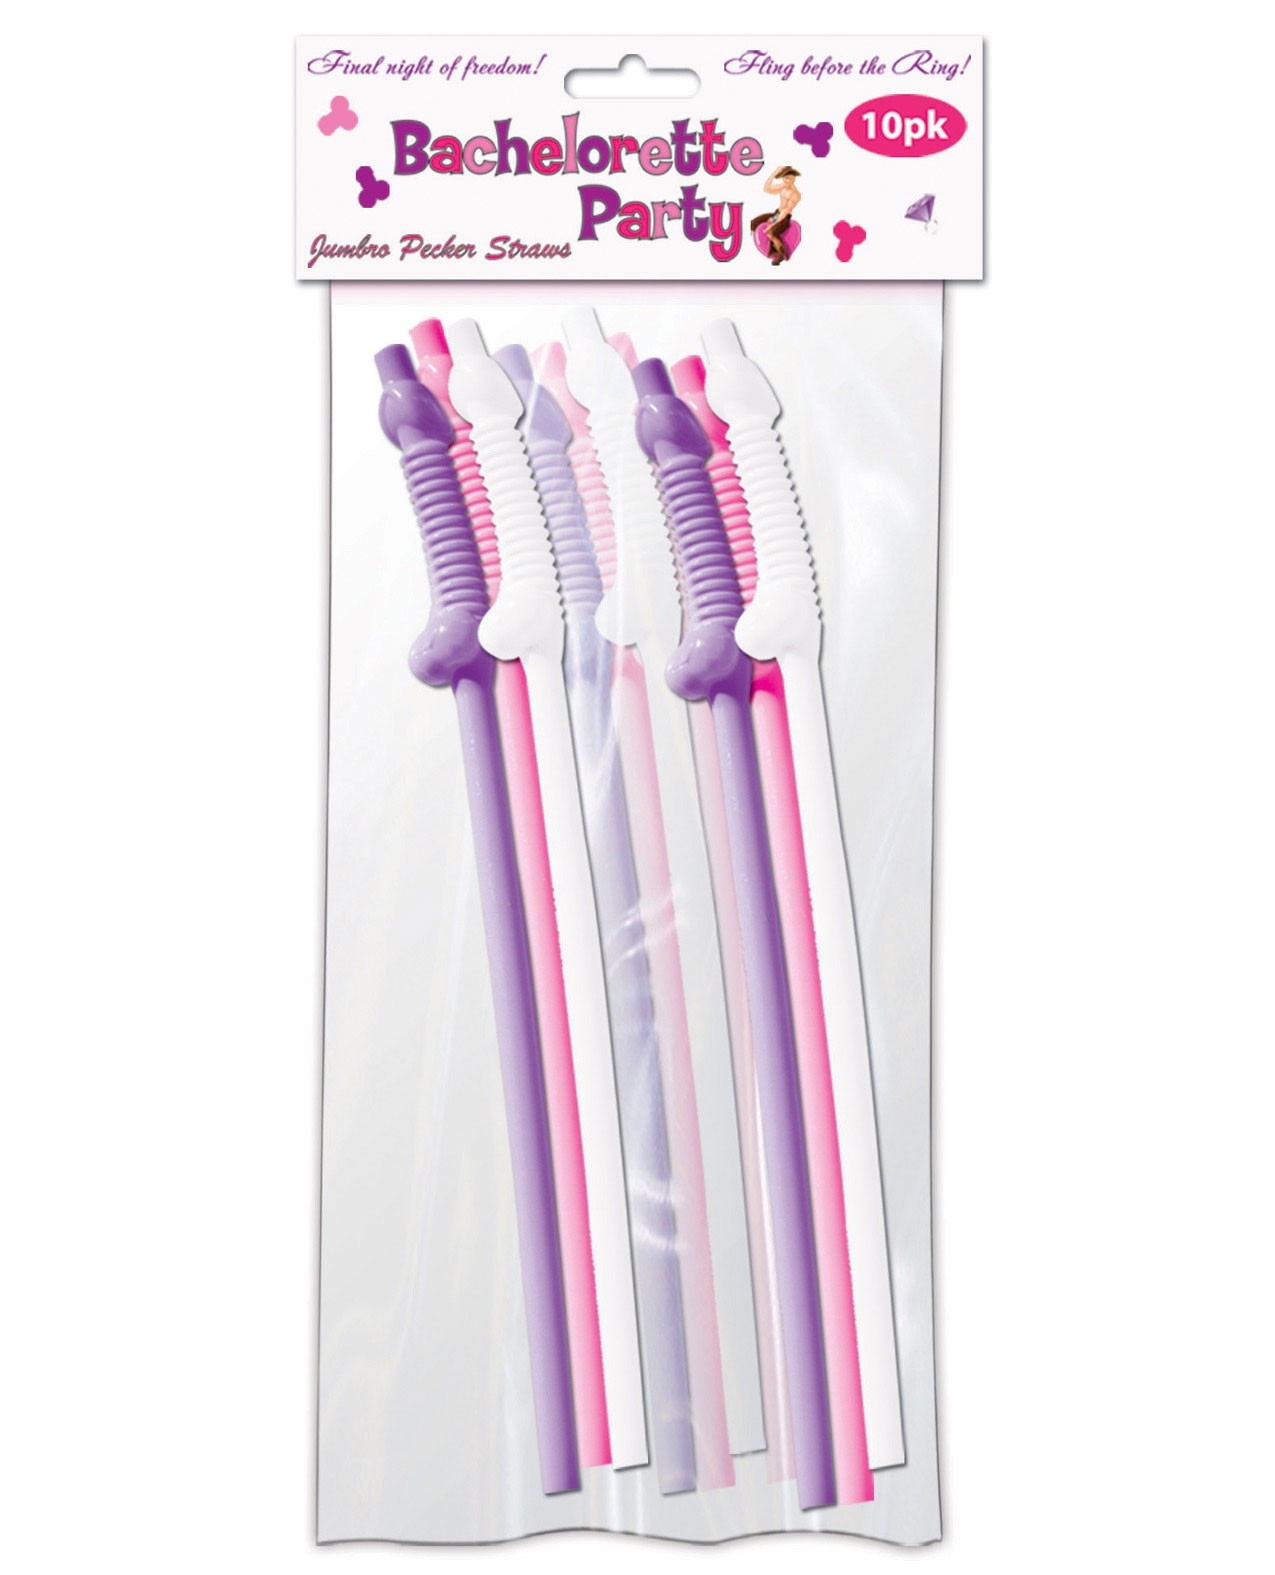 https://www.shopcupids.com/5037-thickbox_default/bachelorette-party-pecker-sipping-straws-assorted-colors-pack-of-10.jpg